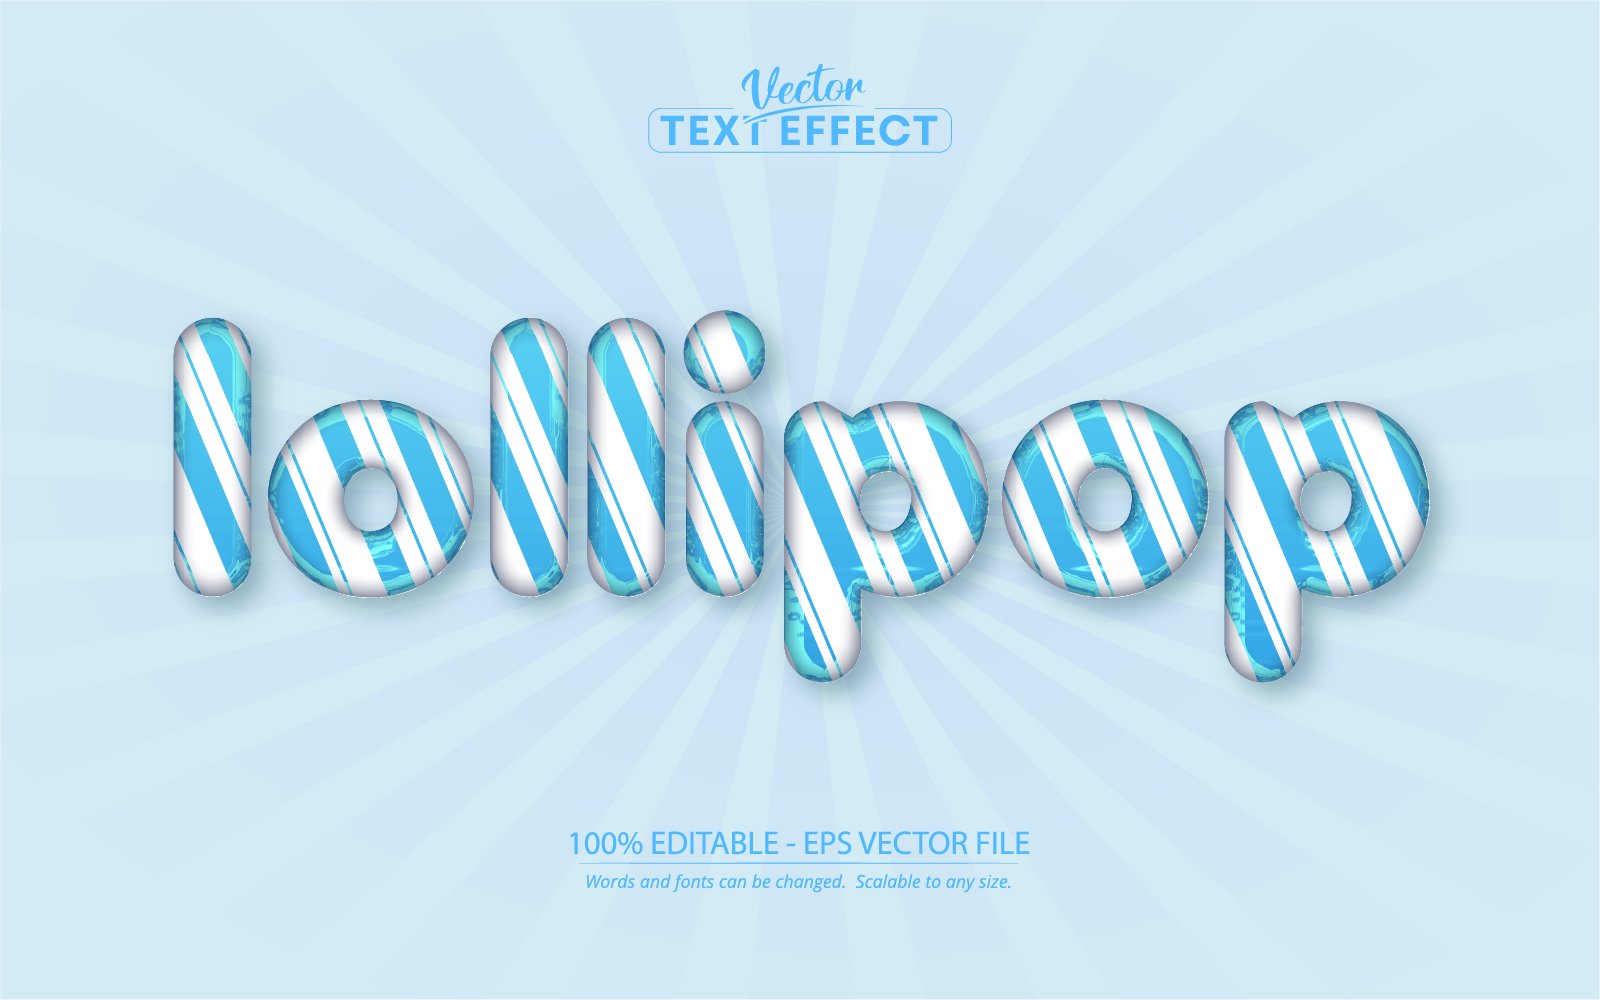 Lollipop - Editable Text Effect, Comic And Blue Cartoon Text Style, Graphics Illustration